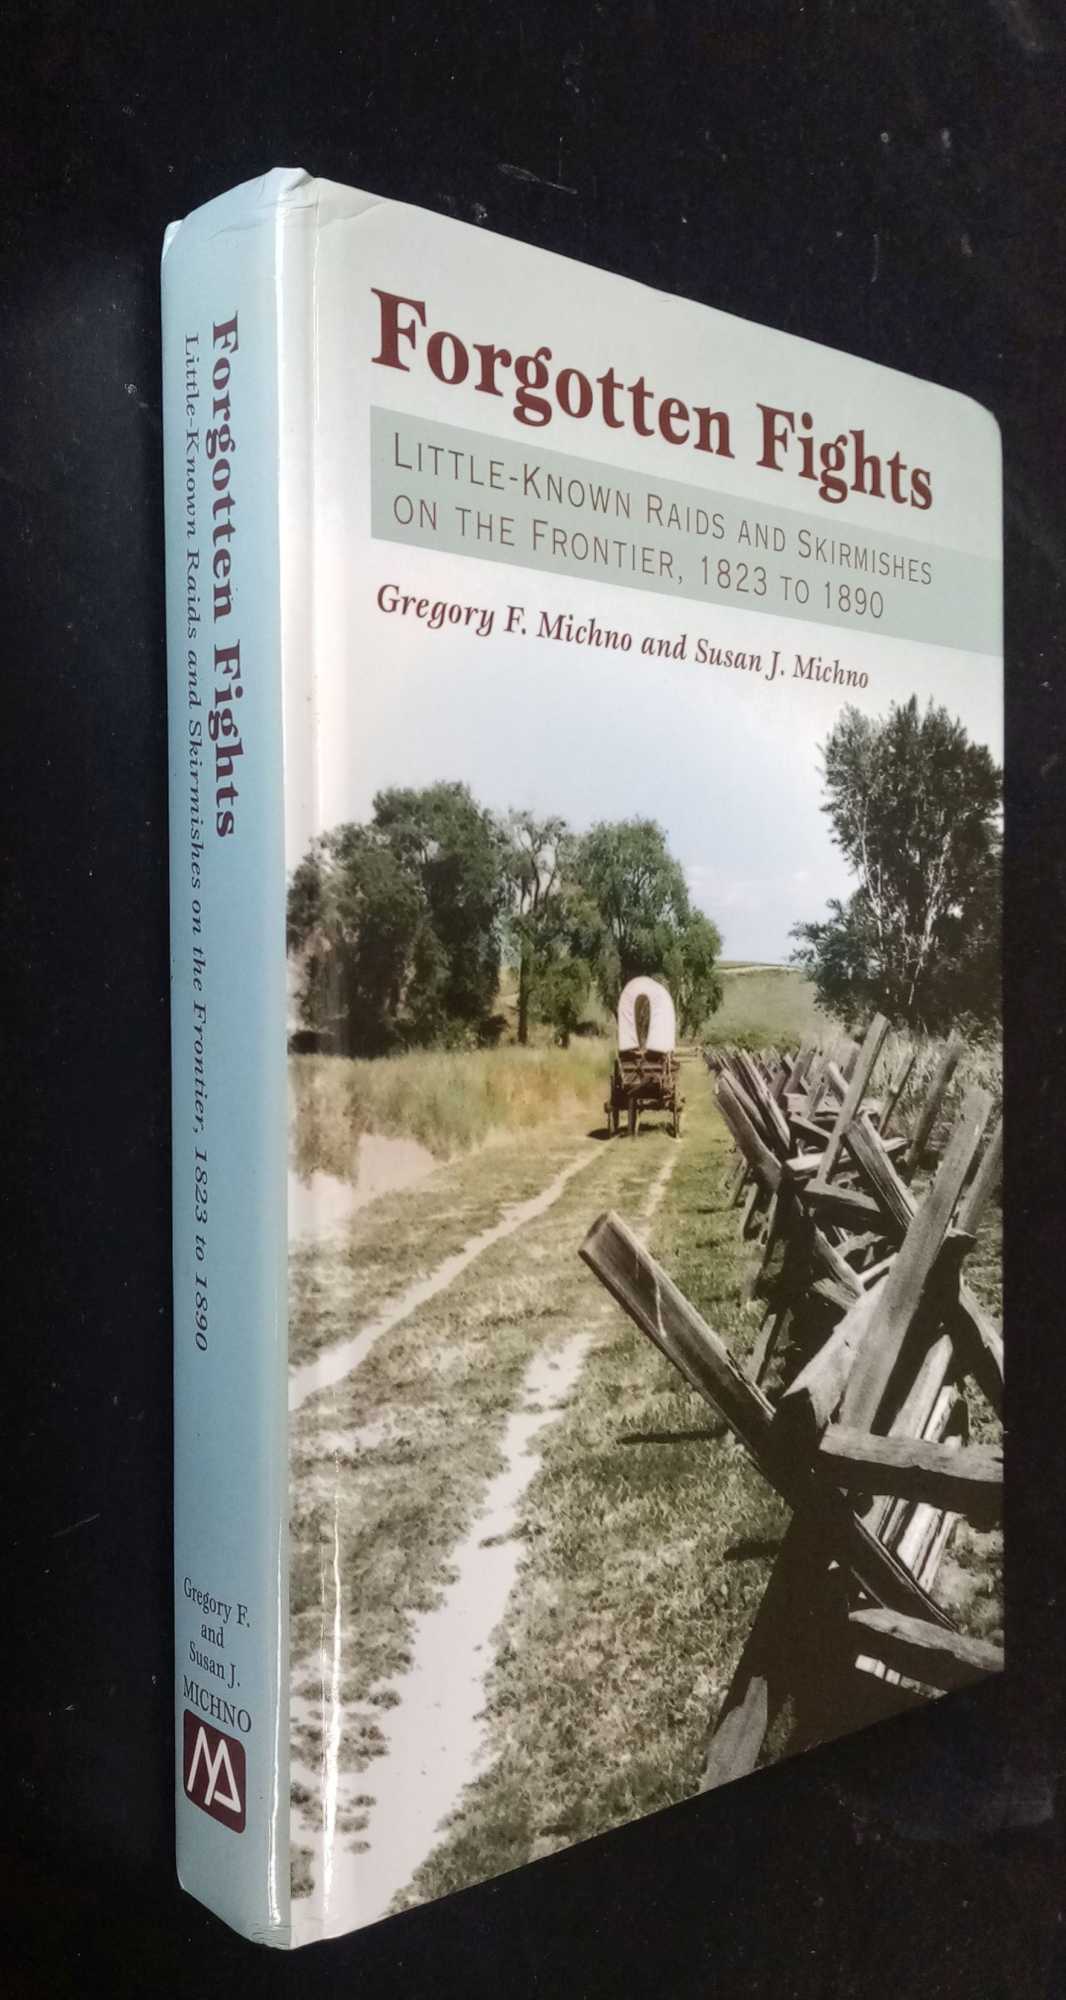 Gregory Michno - Forgotten Fights: Little-Known Raids and Skirmishes on the Frontier, 1823 to 1890  [Western Indian Wars, US History]